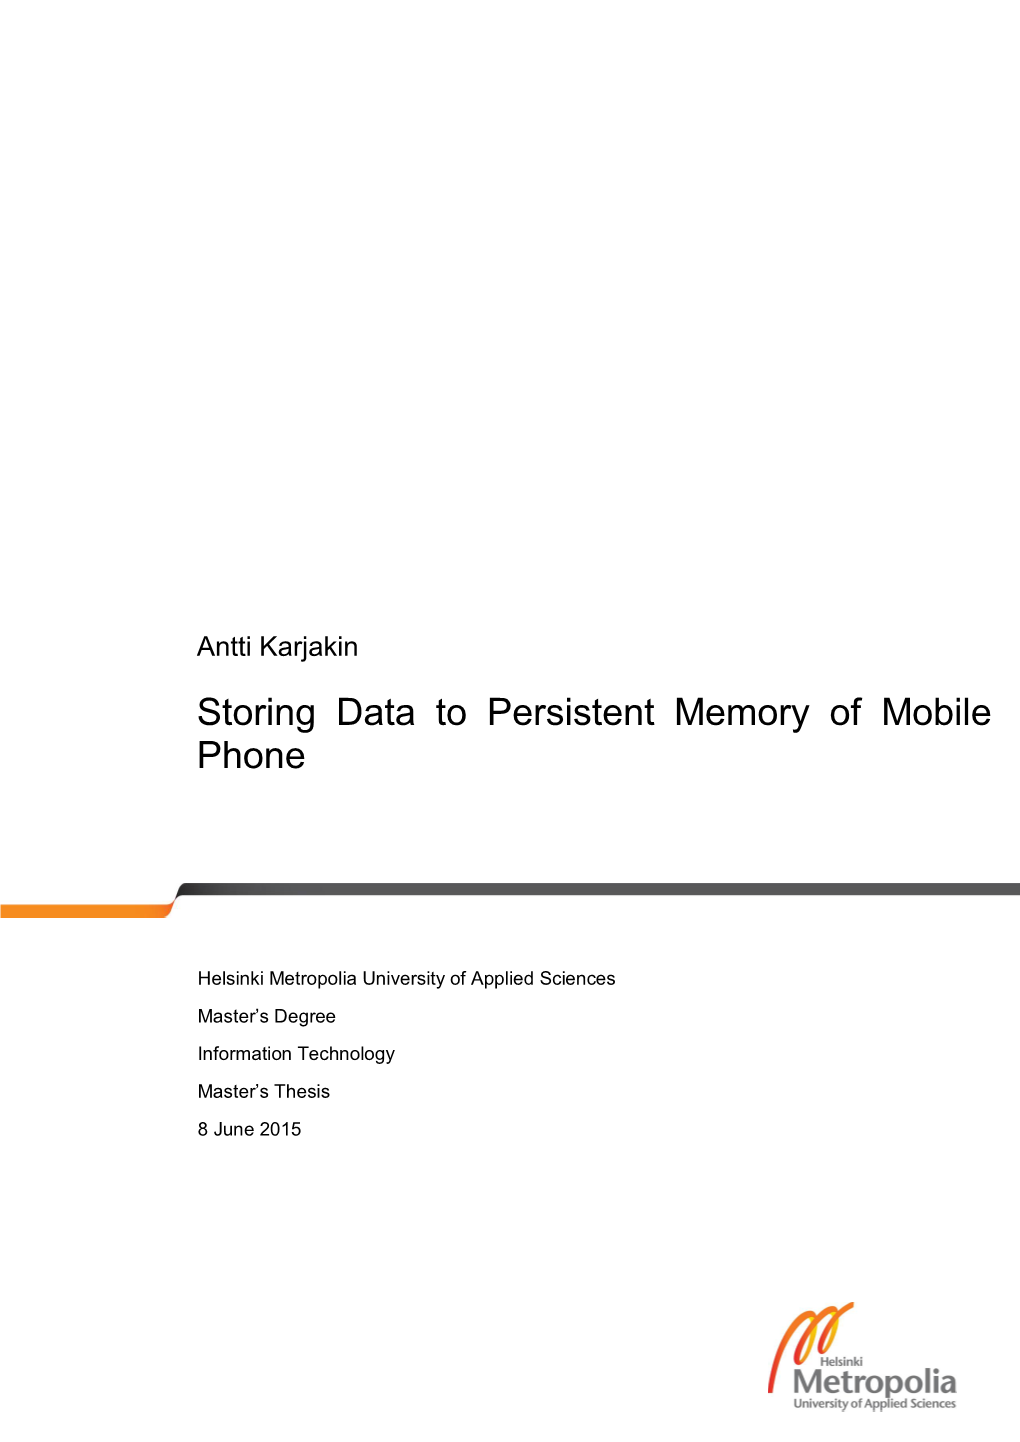 Storing Data to Persistent Memory of Mobile Phone